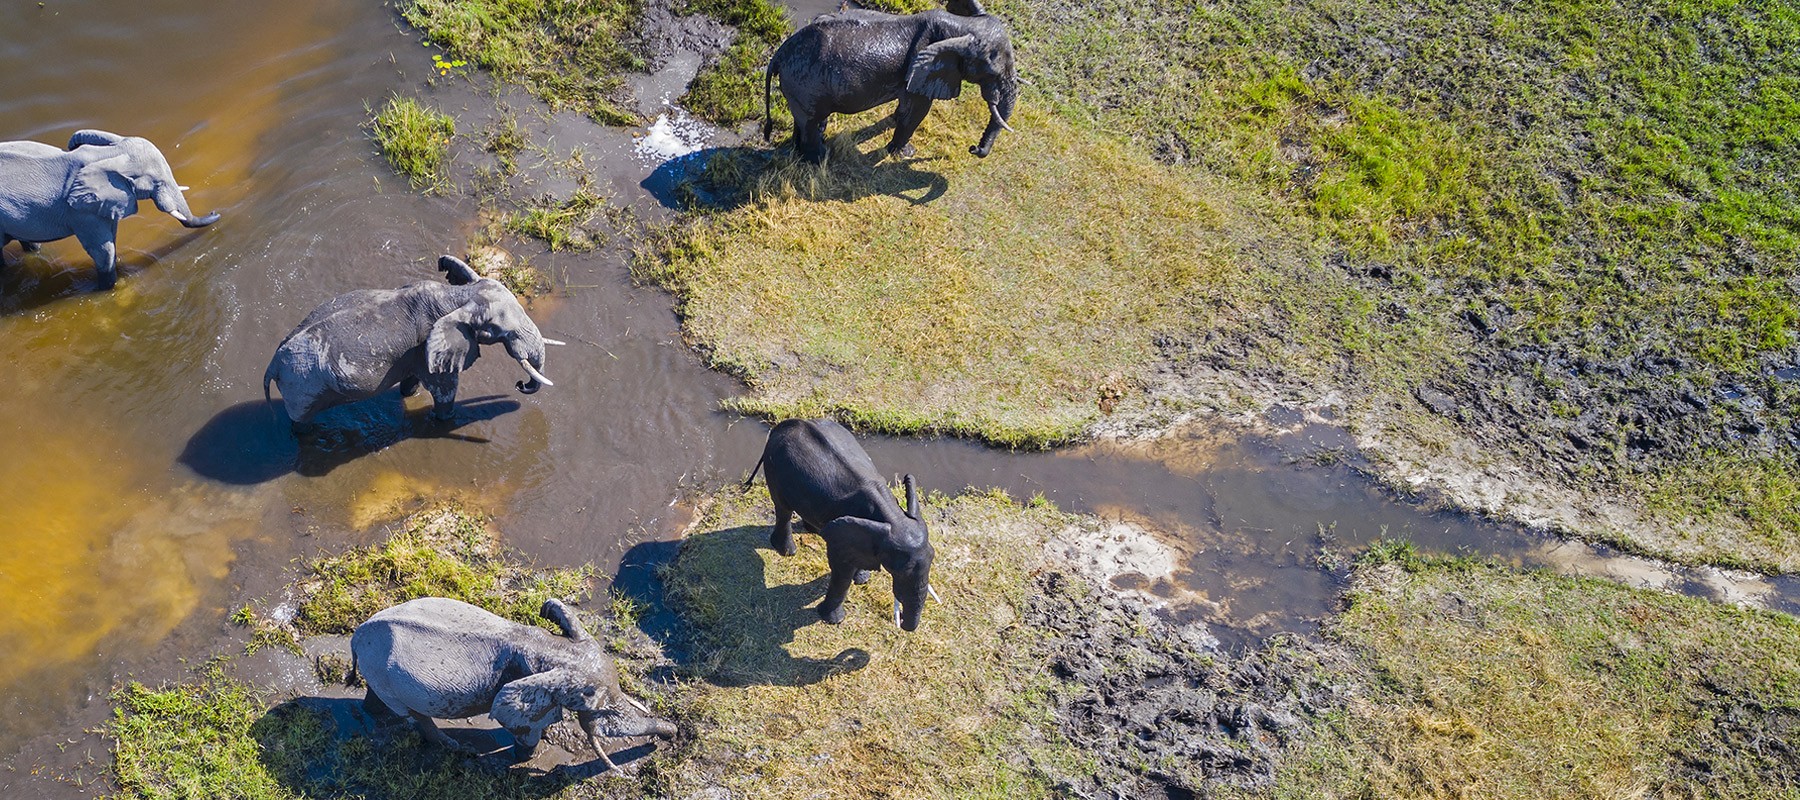 Areal view of a wetland with elephants walking through it